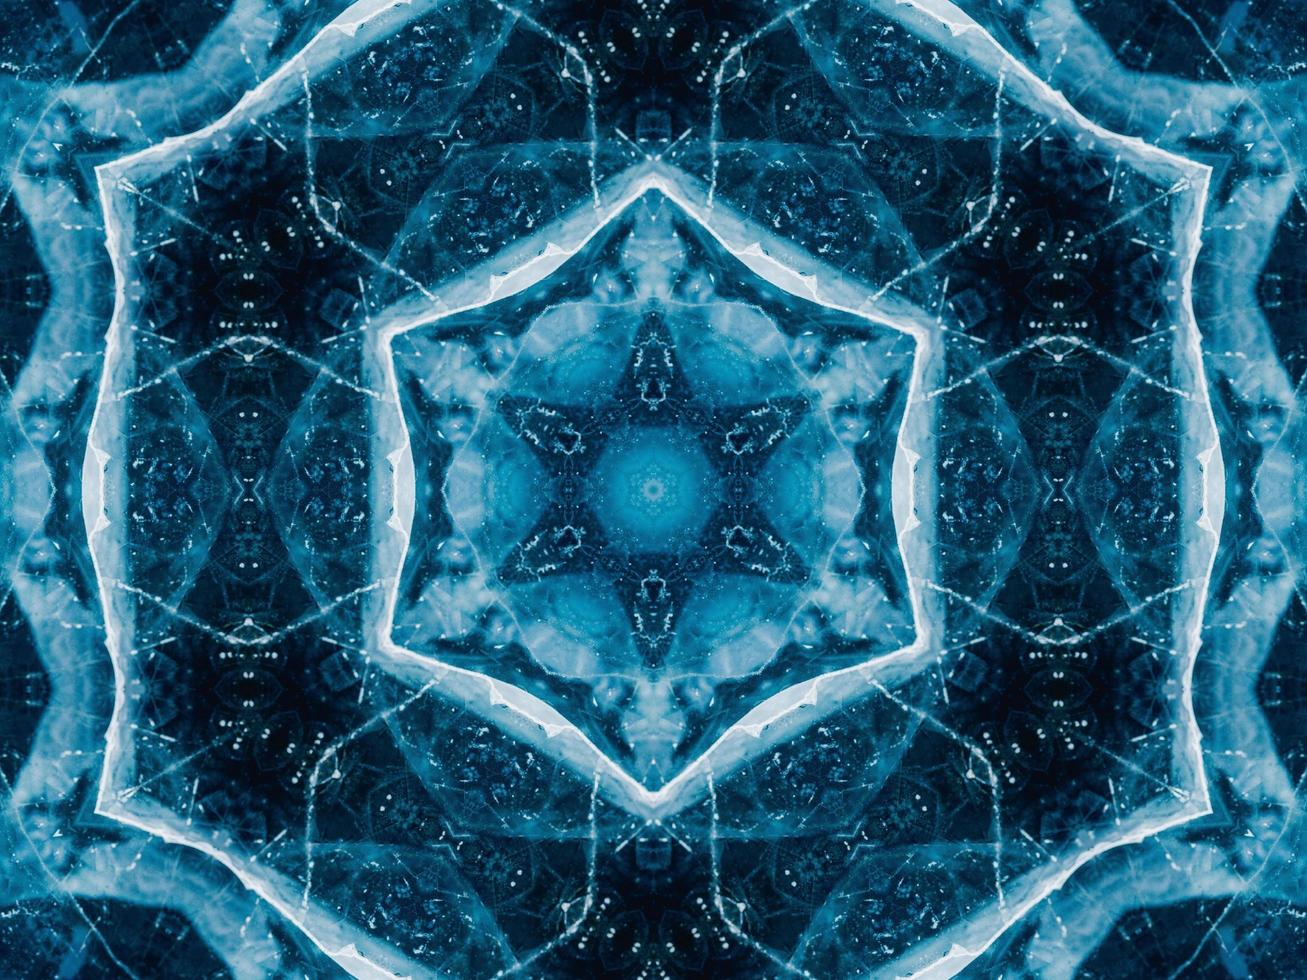 Reflection of deep blue sea in kaleidoscope pattern. Dark blue abstract background. Free photo. photo